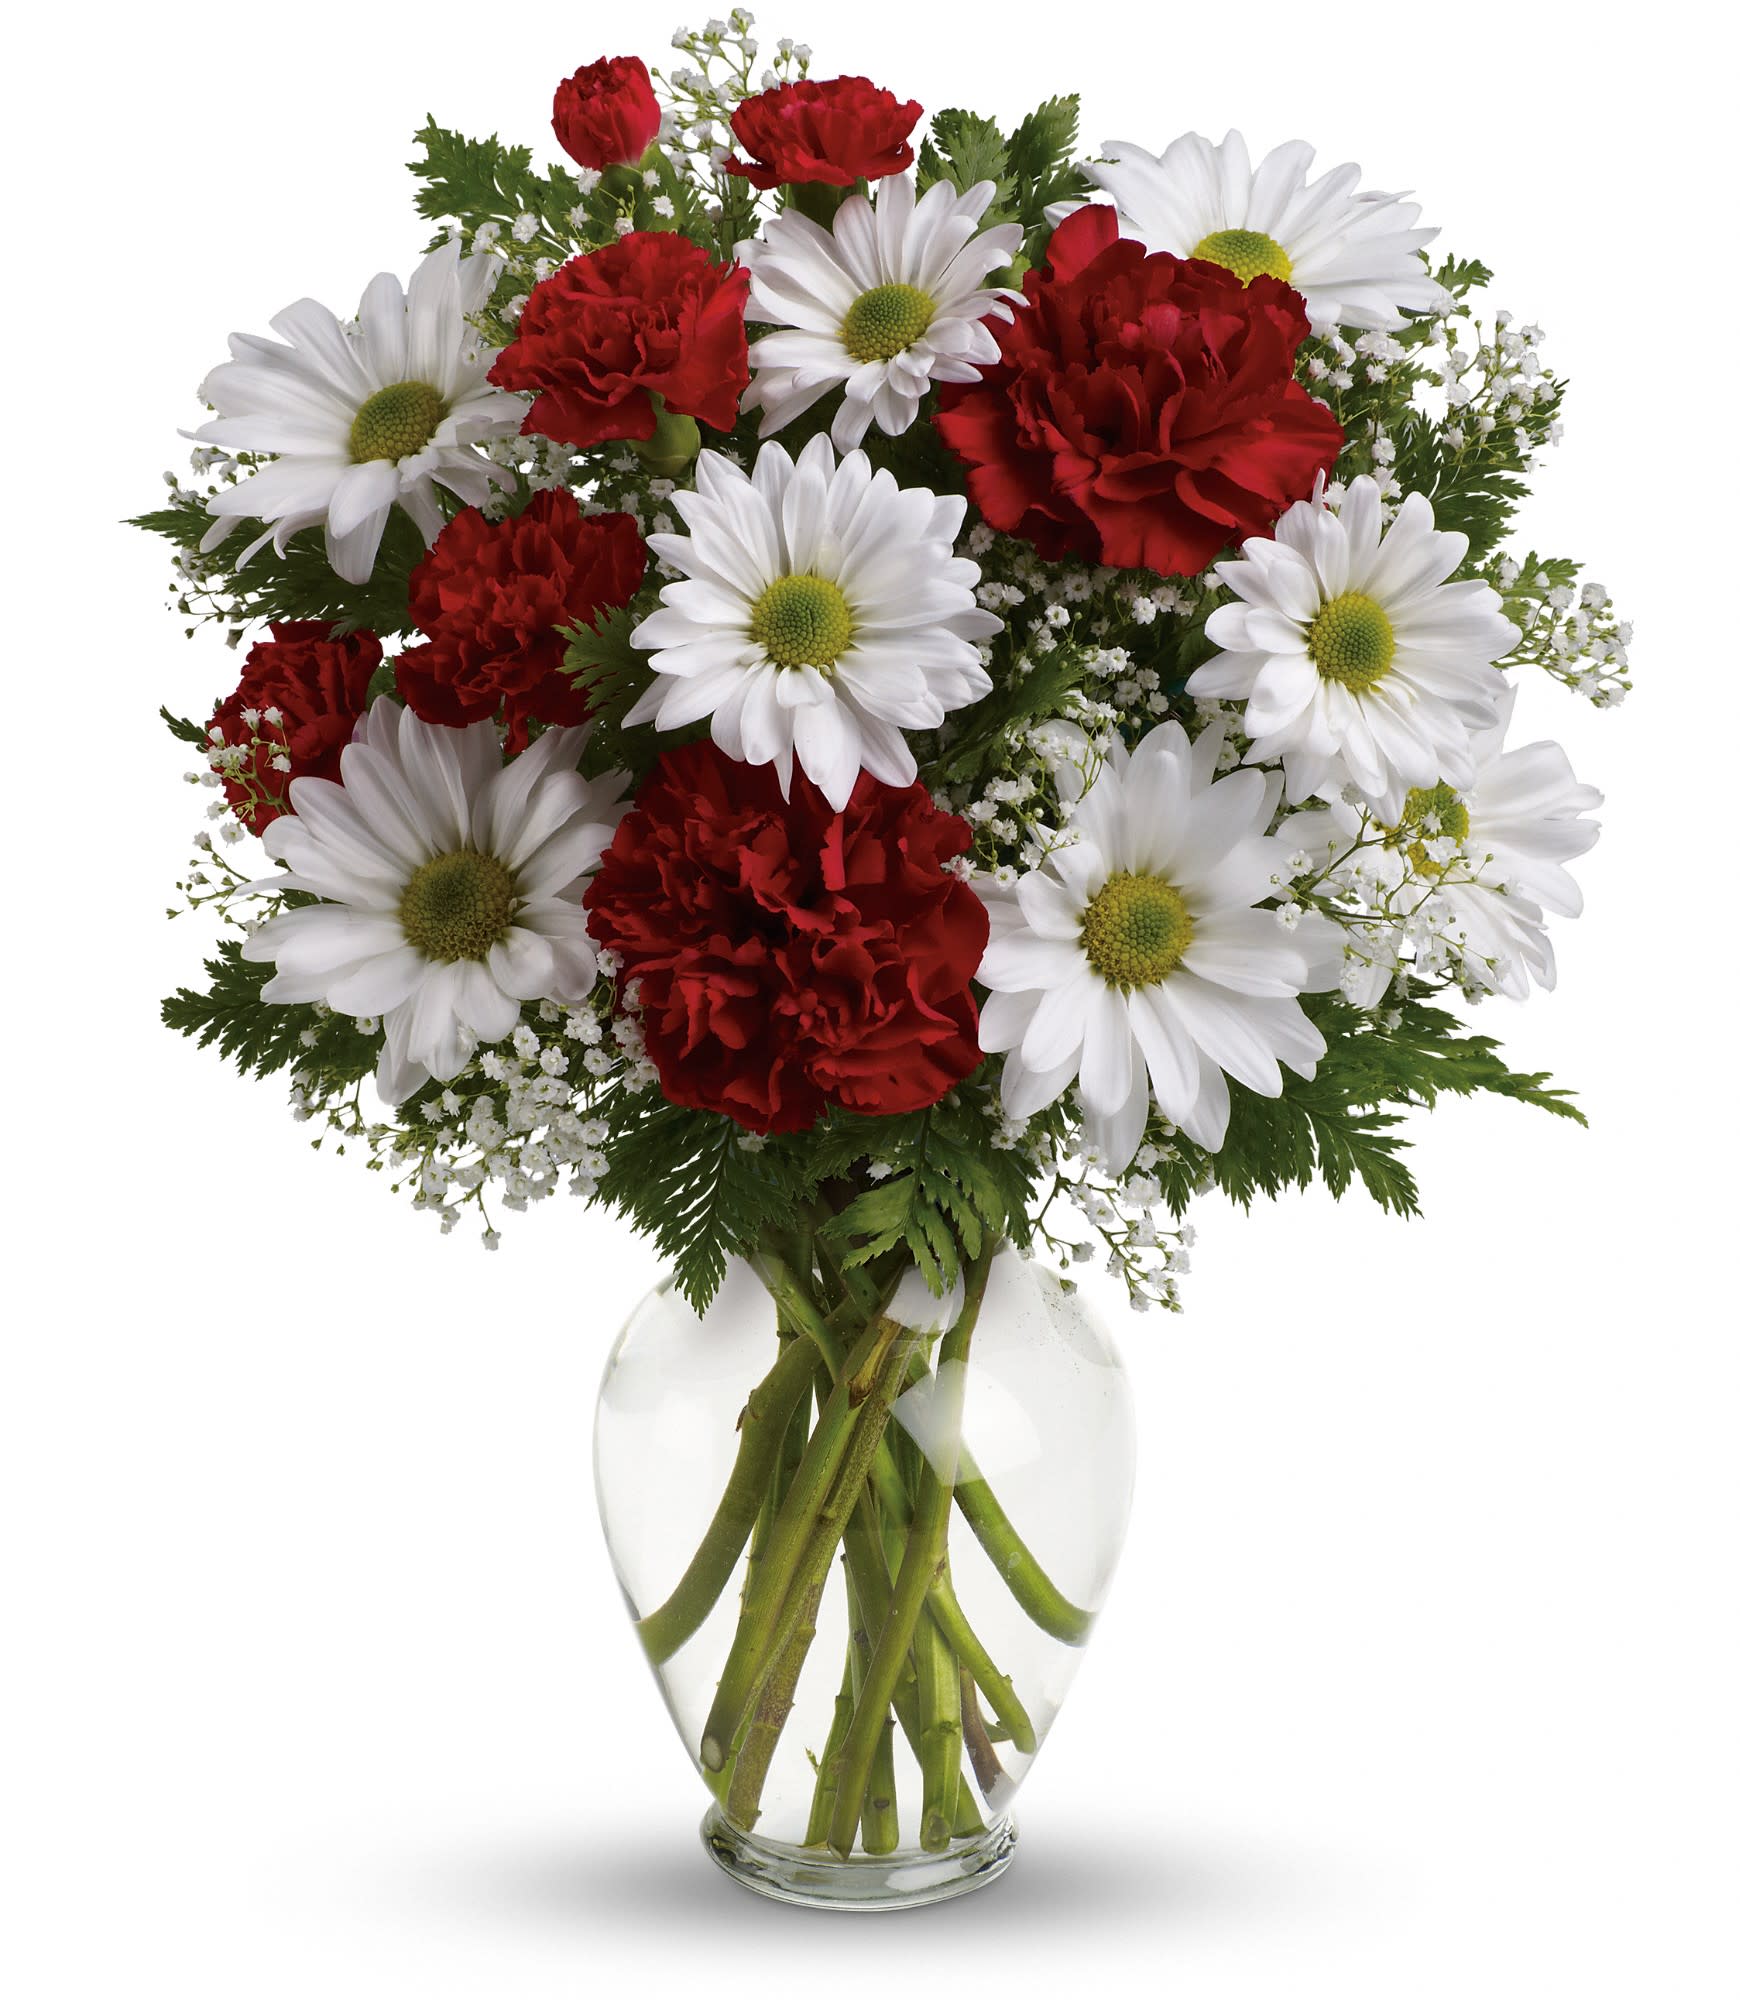 Kindest Heart Bouquet  - A special show of kindness, on Valentine's Day or any day of the year! This eye-catching arrangement of red carnations, white daisies and delicate baby's breath will surprise and delight your special someone - and remain a treasured memory for years to come.